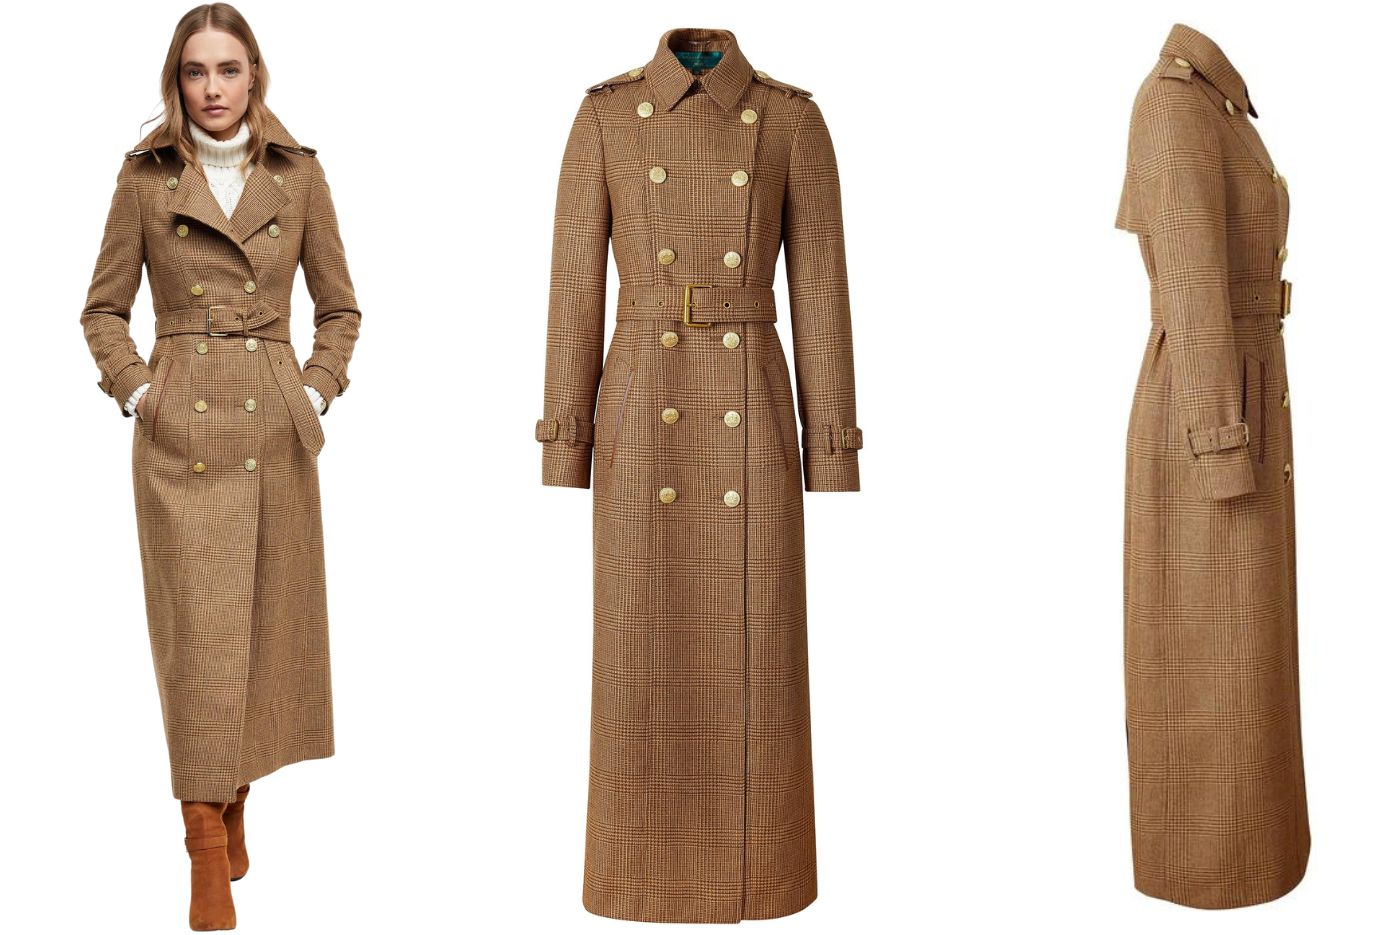 https://www.regalfille.com/wp-content/uploads/2023/08/The-Princess-of-Wales-Kate-Middleton-wore-Holland-Cooper-Full-Length-Marlborough-Trench-Coat-at-the-Balmoral-Sunday-Church-service-in-August-2023.jpg